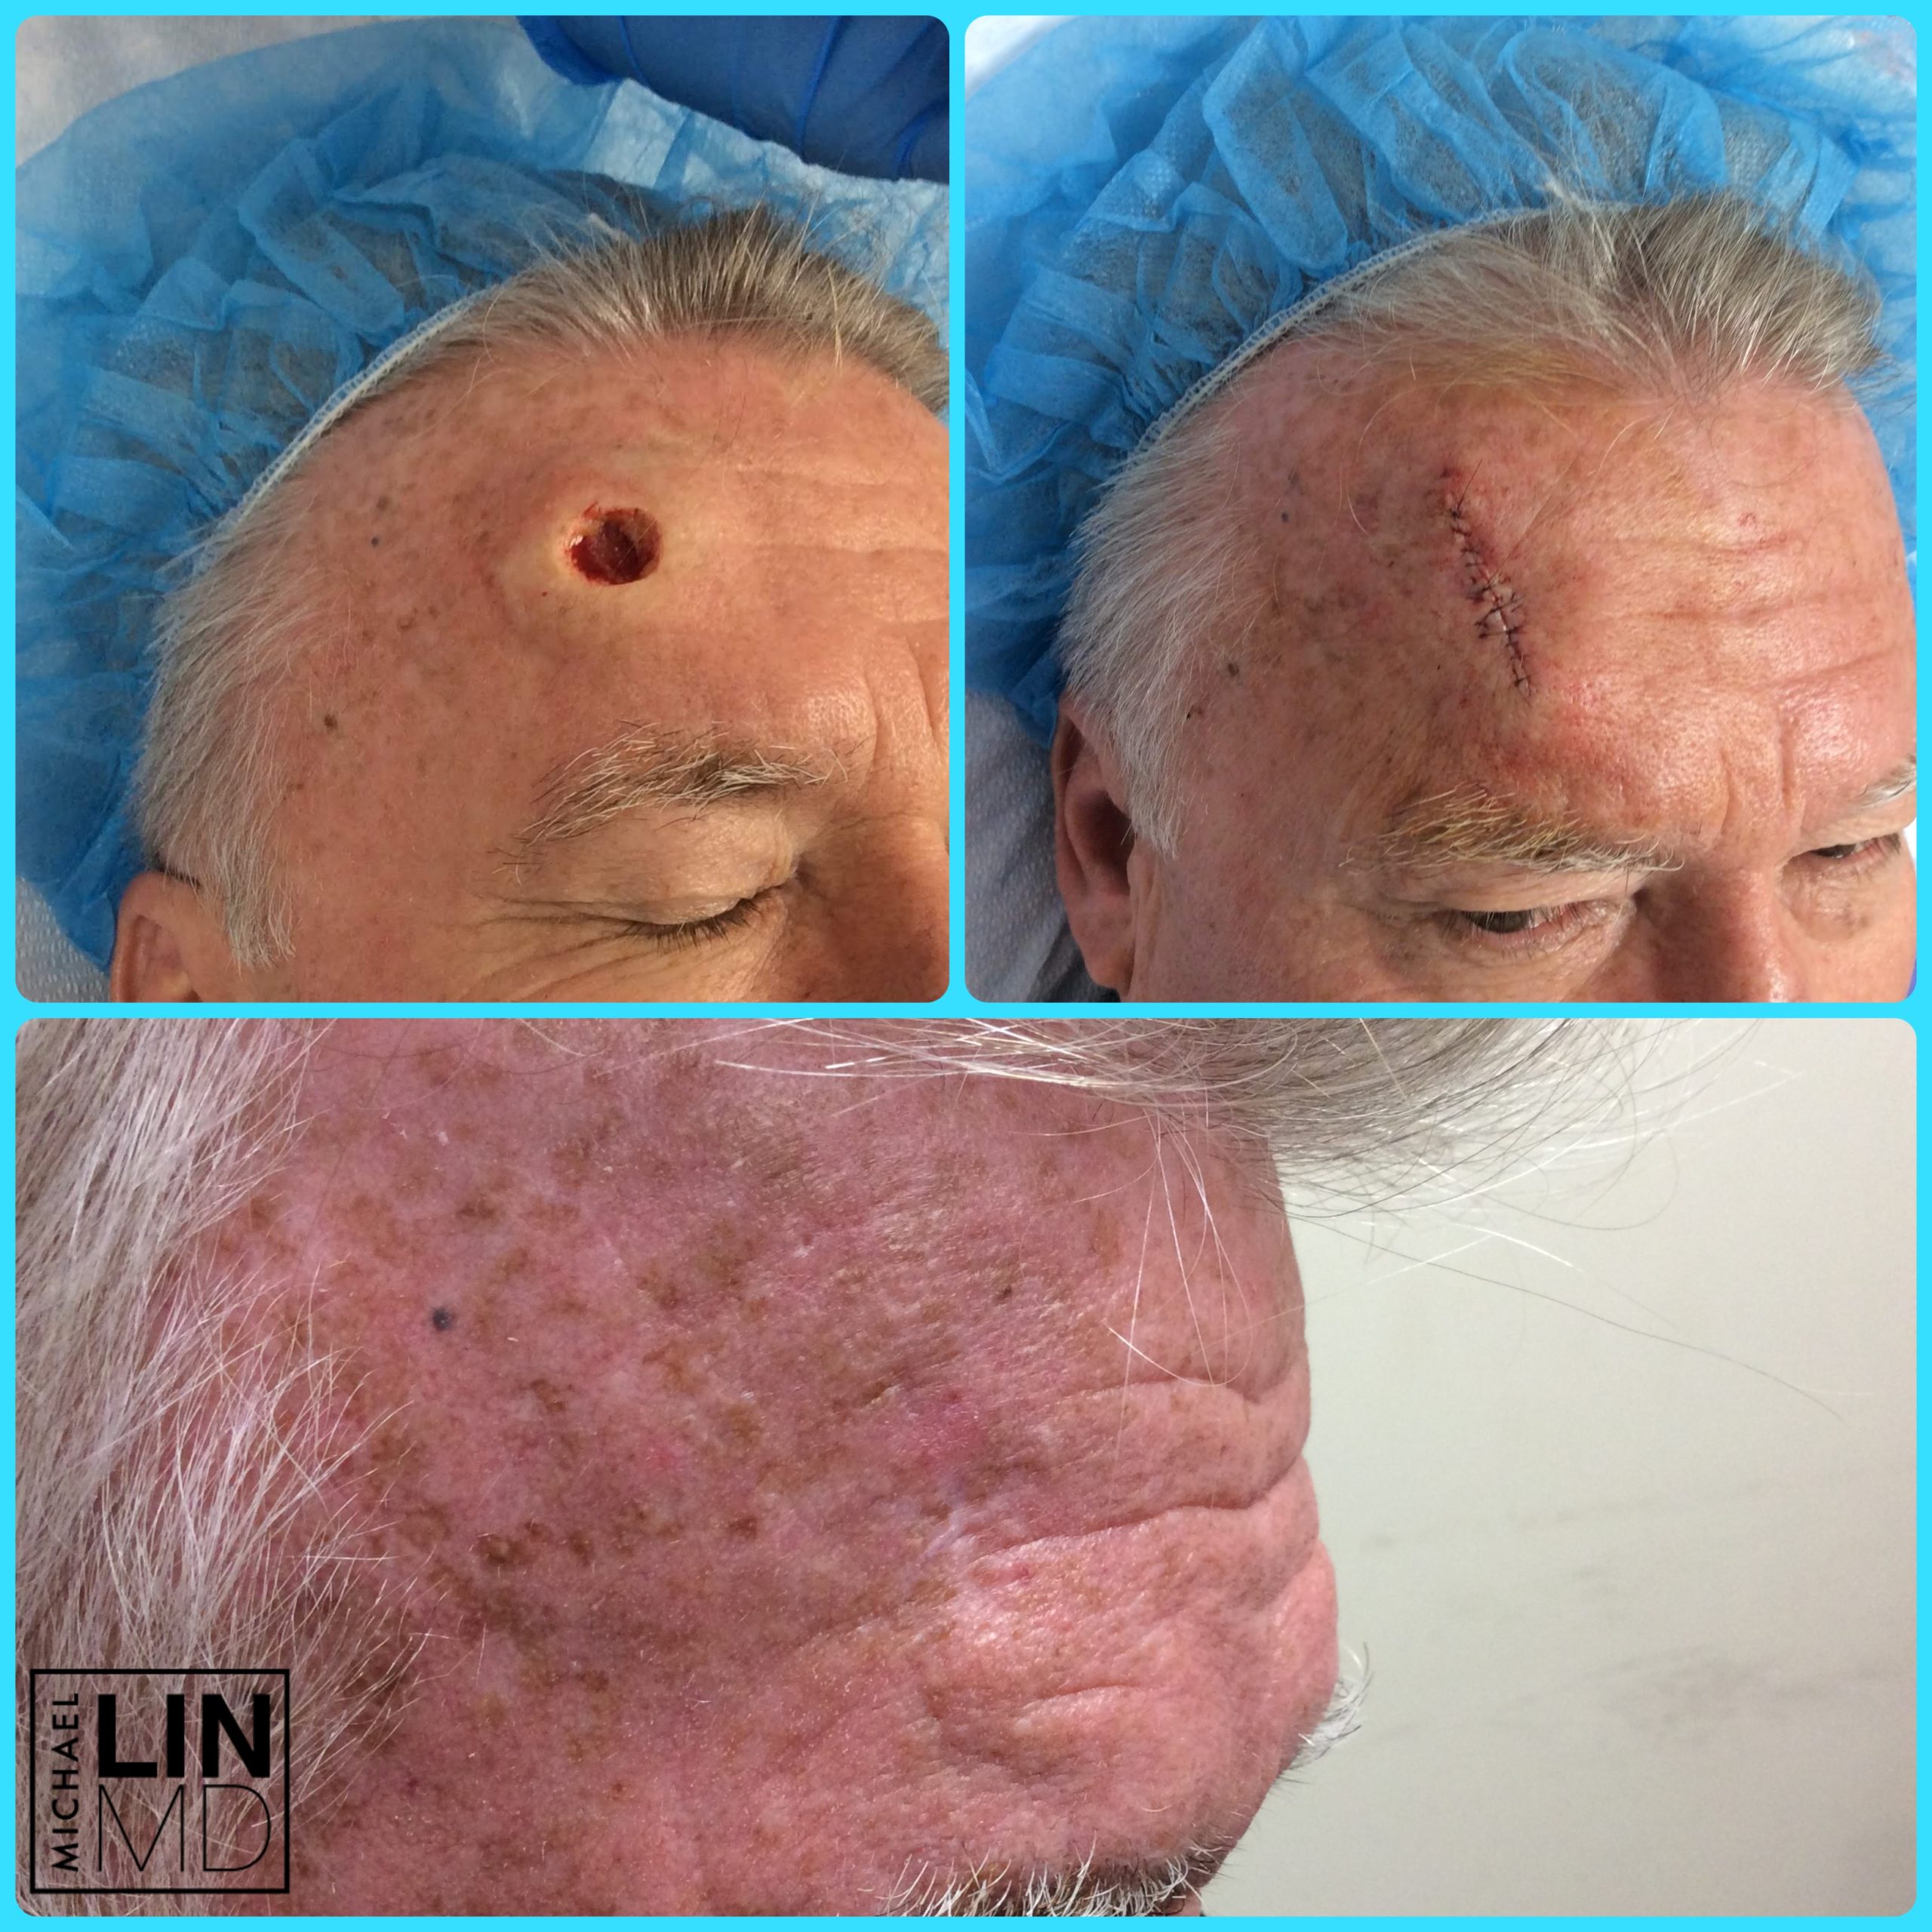 Circular incision on a man's forehead